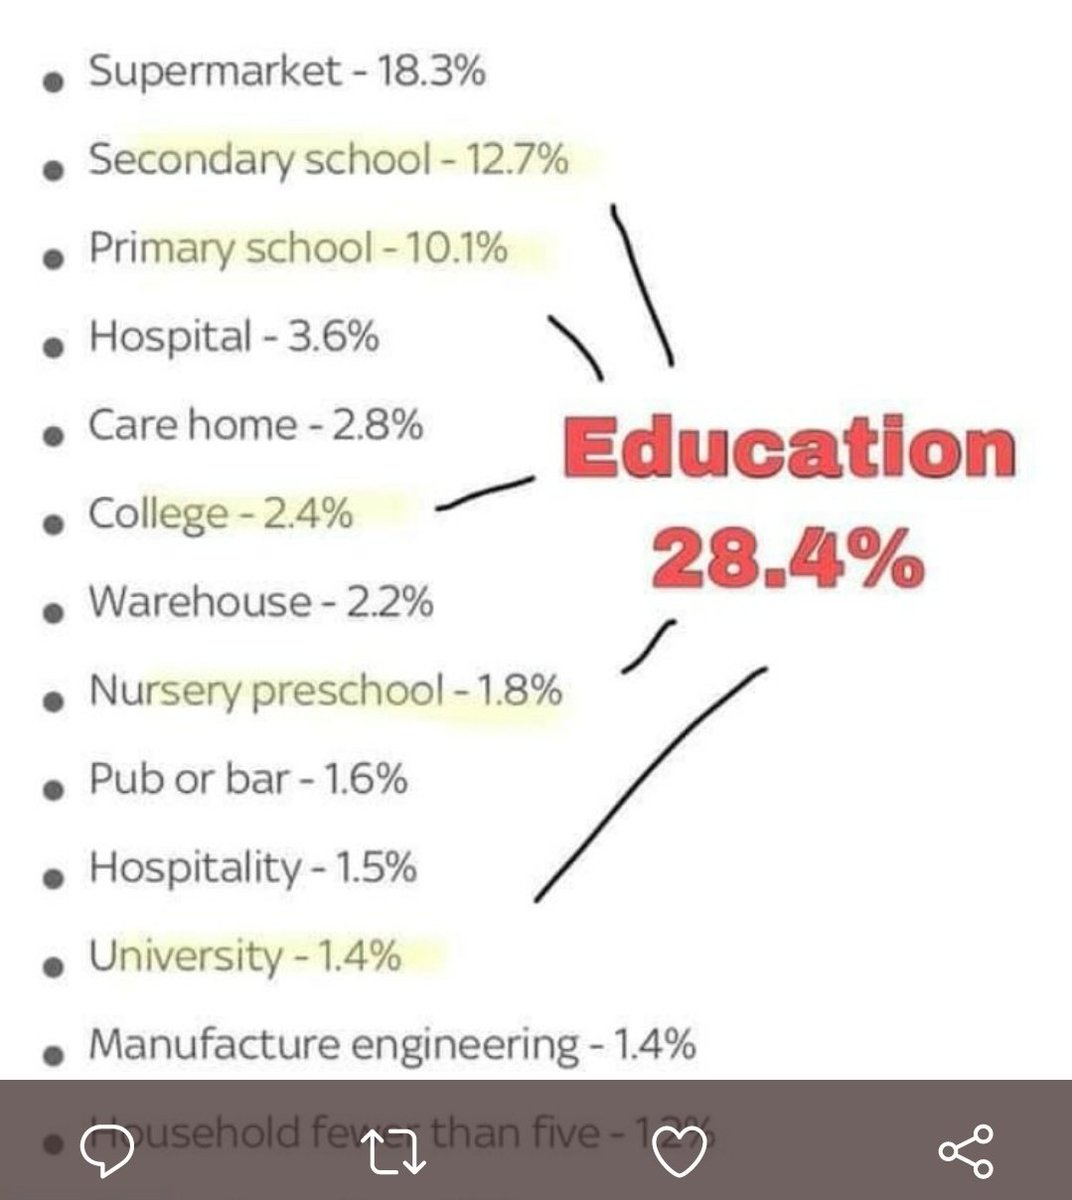 7/ This week we had headlines that supermarkets are the no1 place for infections. However schools were no2 and no3!And look what happens if education hadn't been broken up into seperate settings, a conscious decision?